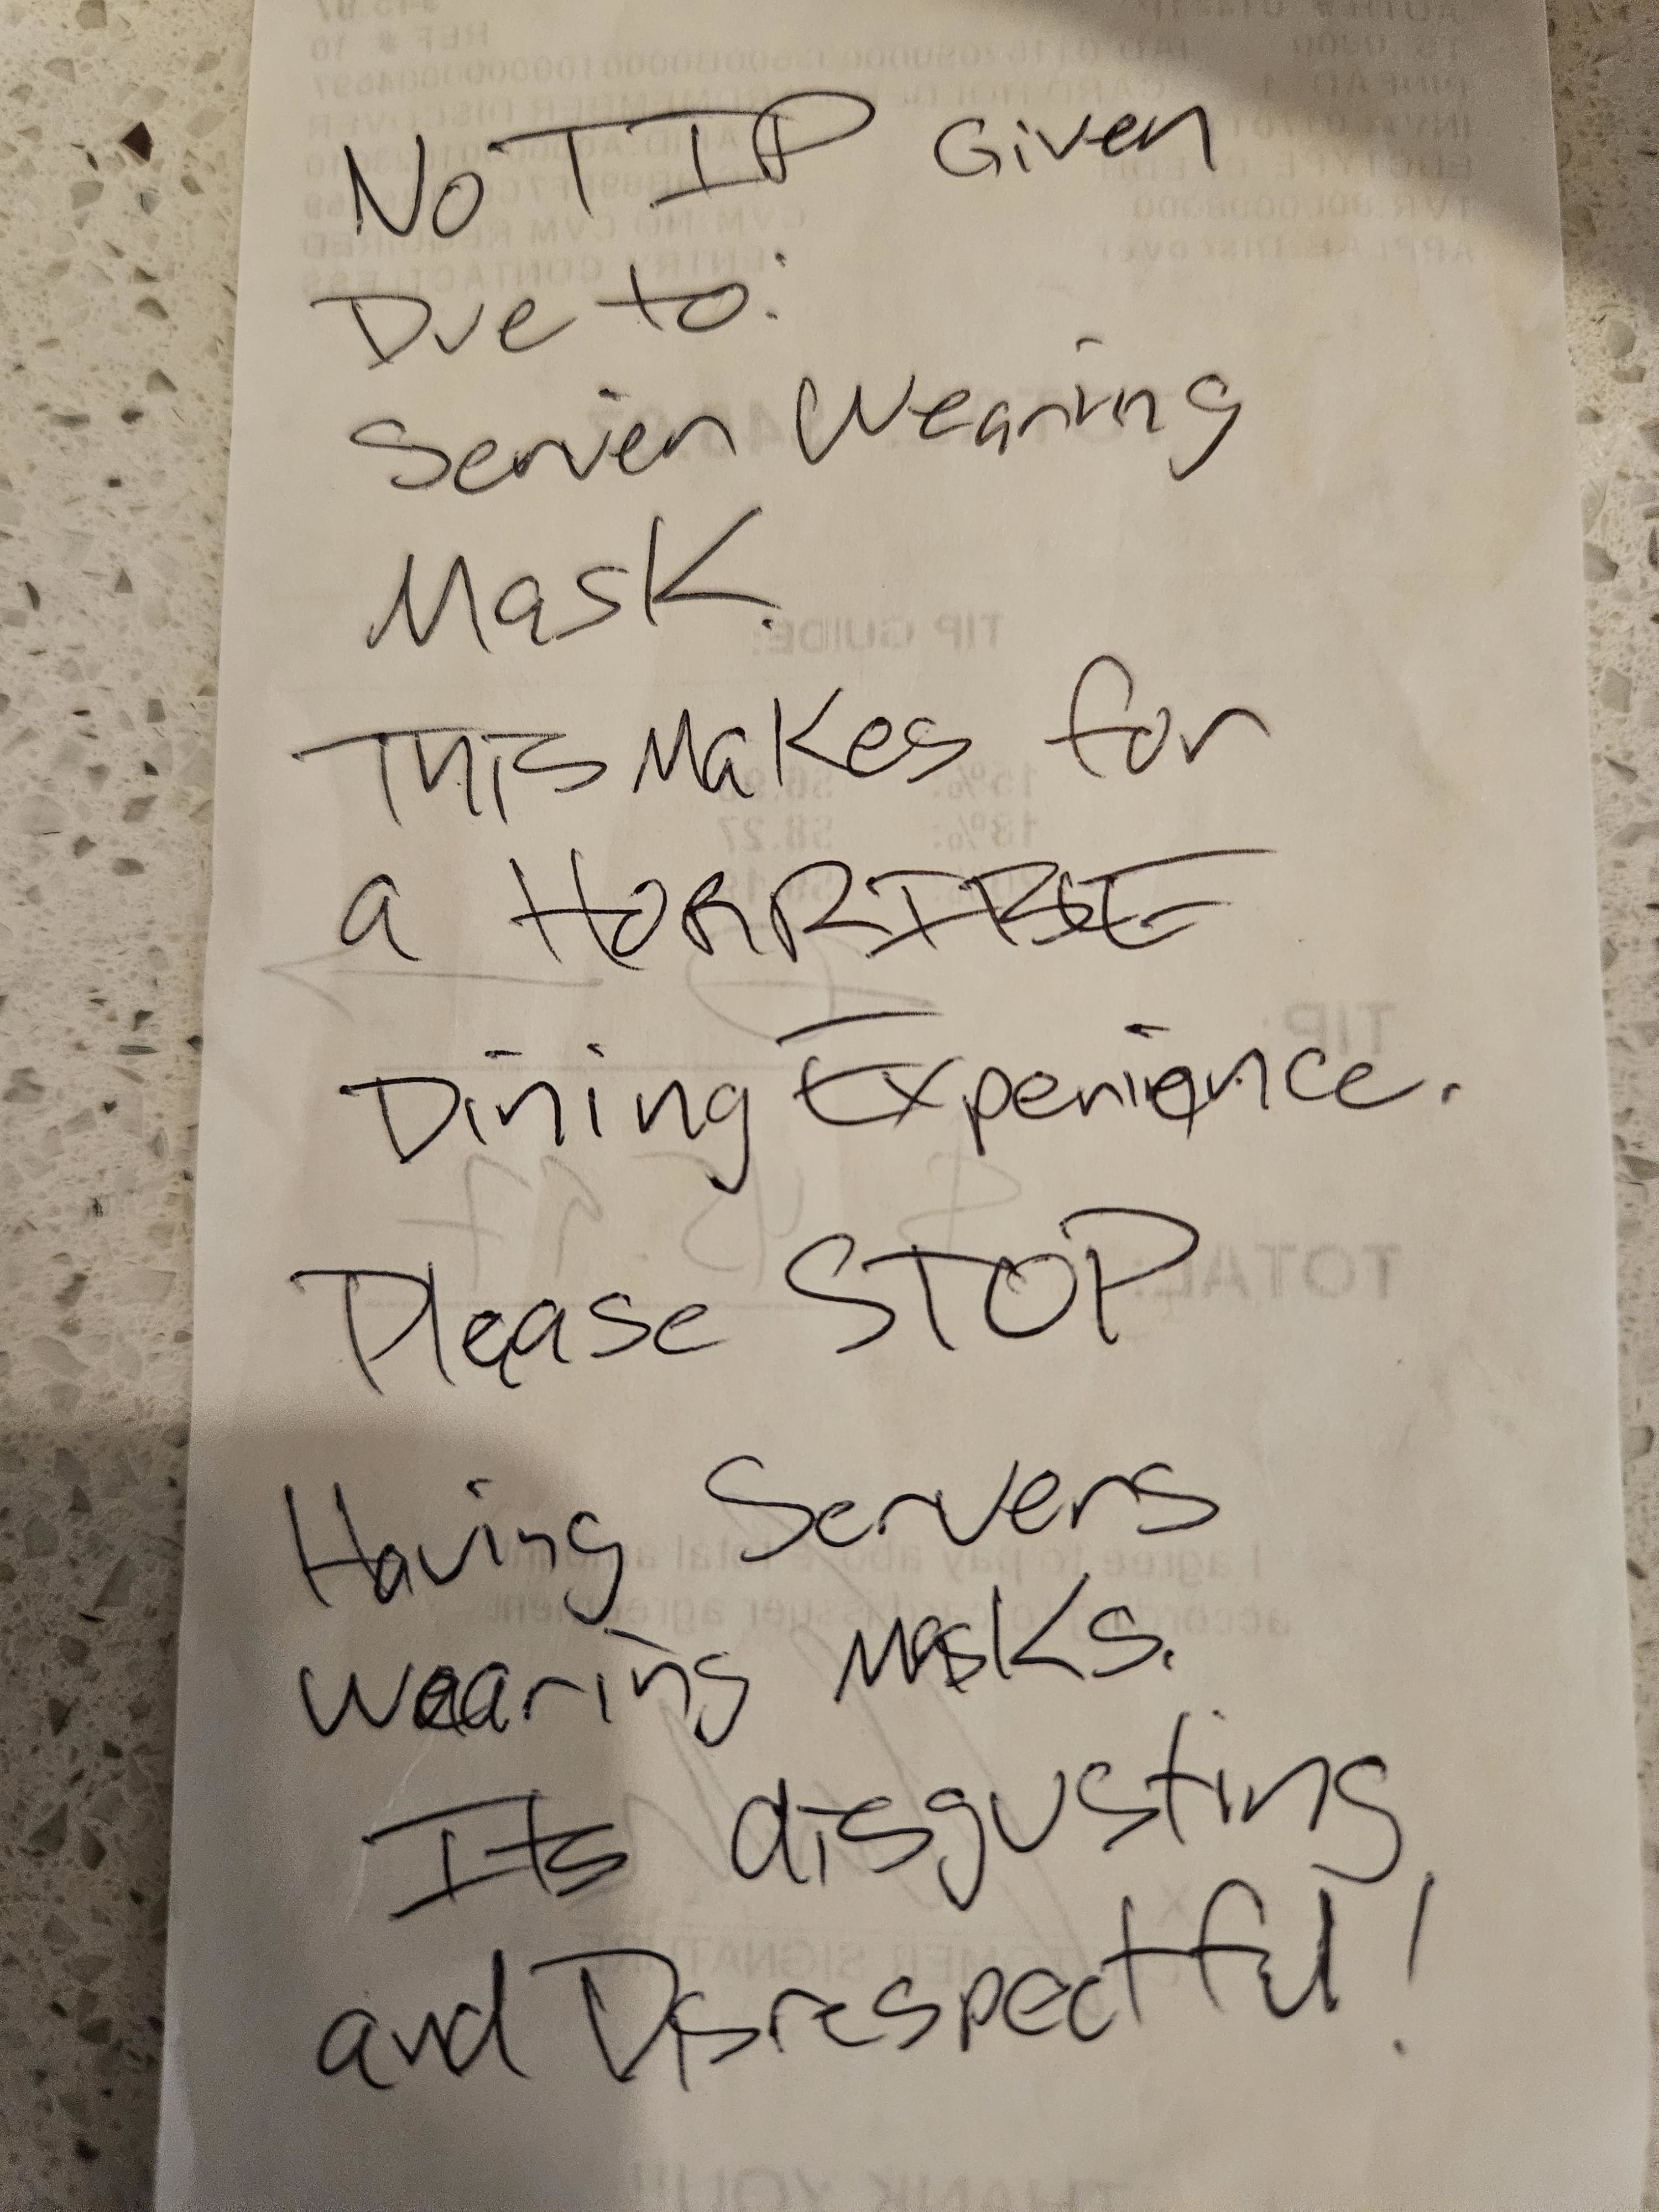 Receipt note criticizing service with no tip for masks, calls for stopping mask use, deems it disrespectful